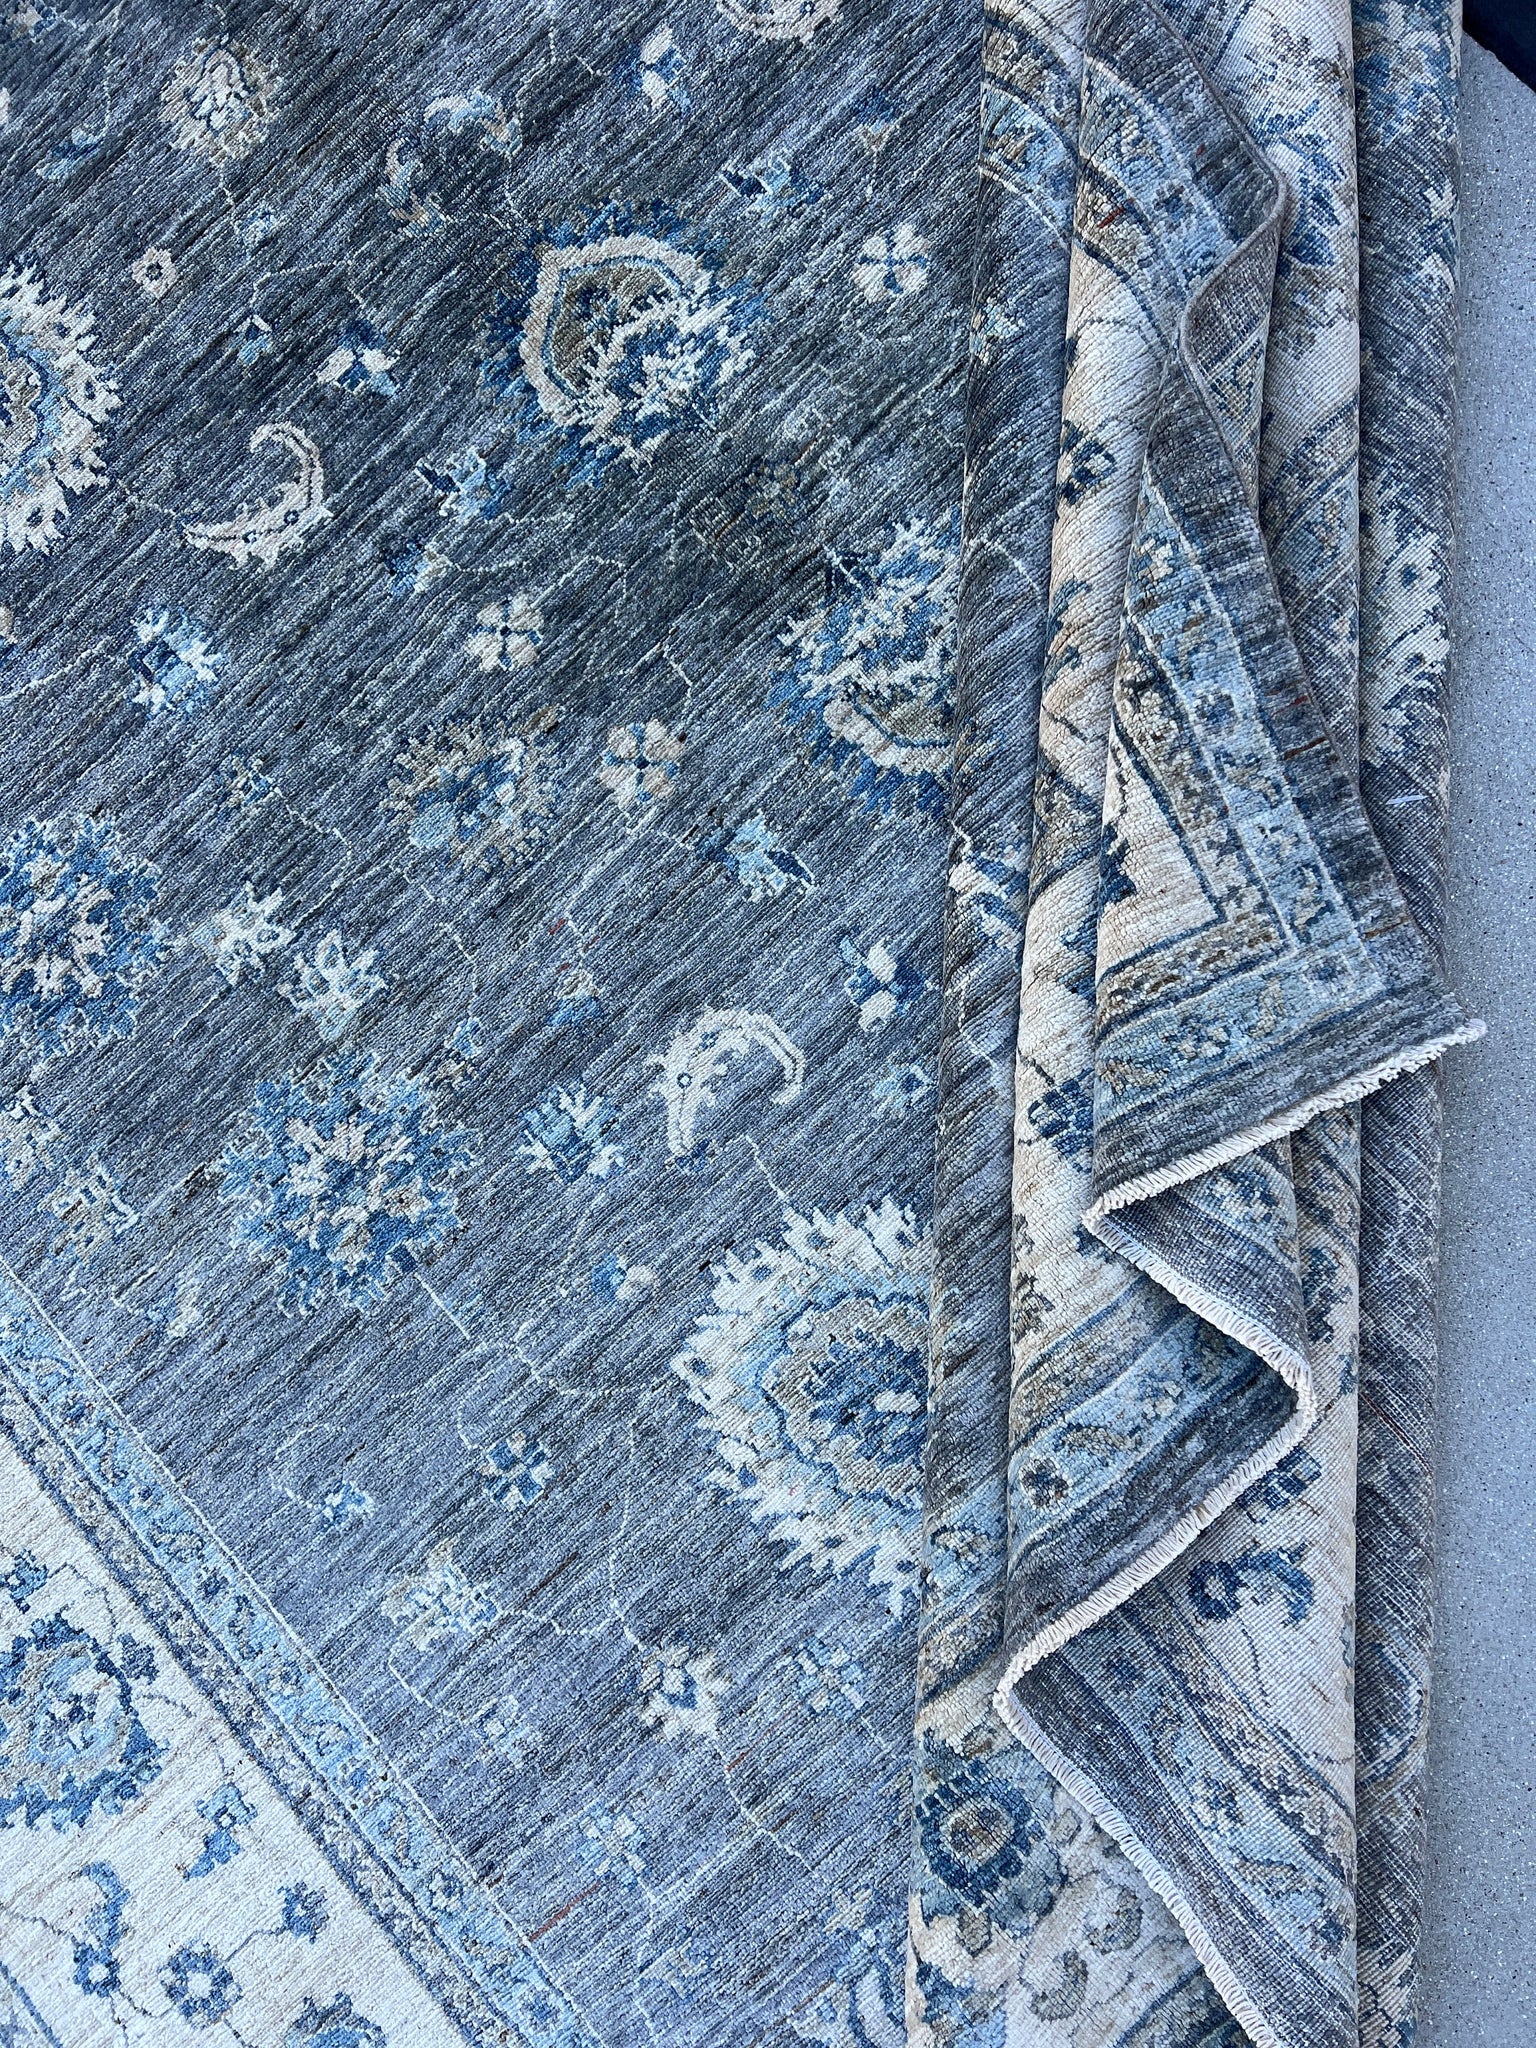 8x10 (245x305) Handmade Afghan Rug | Muted Charcoal Grey Cream Beige Teal Blue Turquoise Sage Green | Tribal Floral Wool Boho Hand Knotted